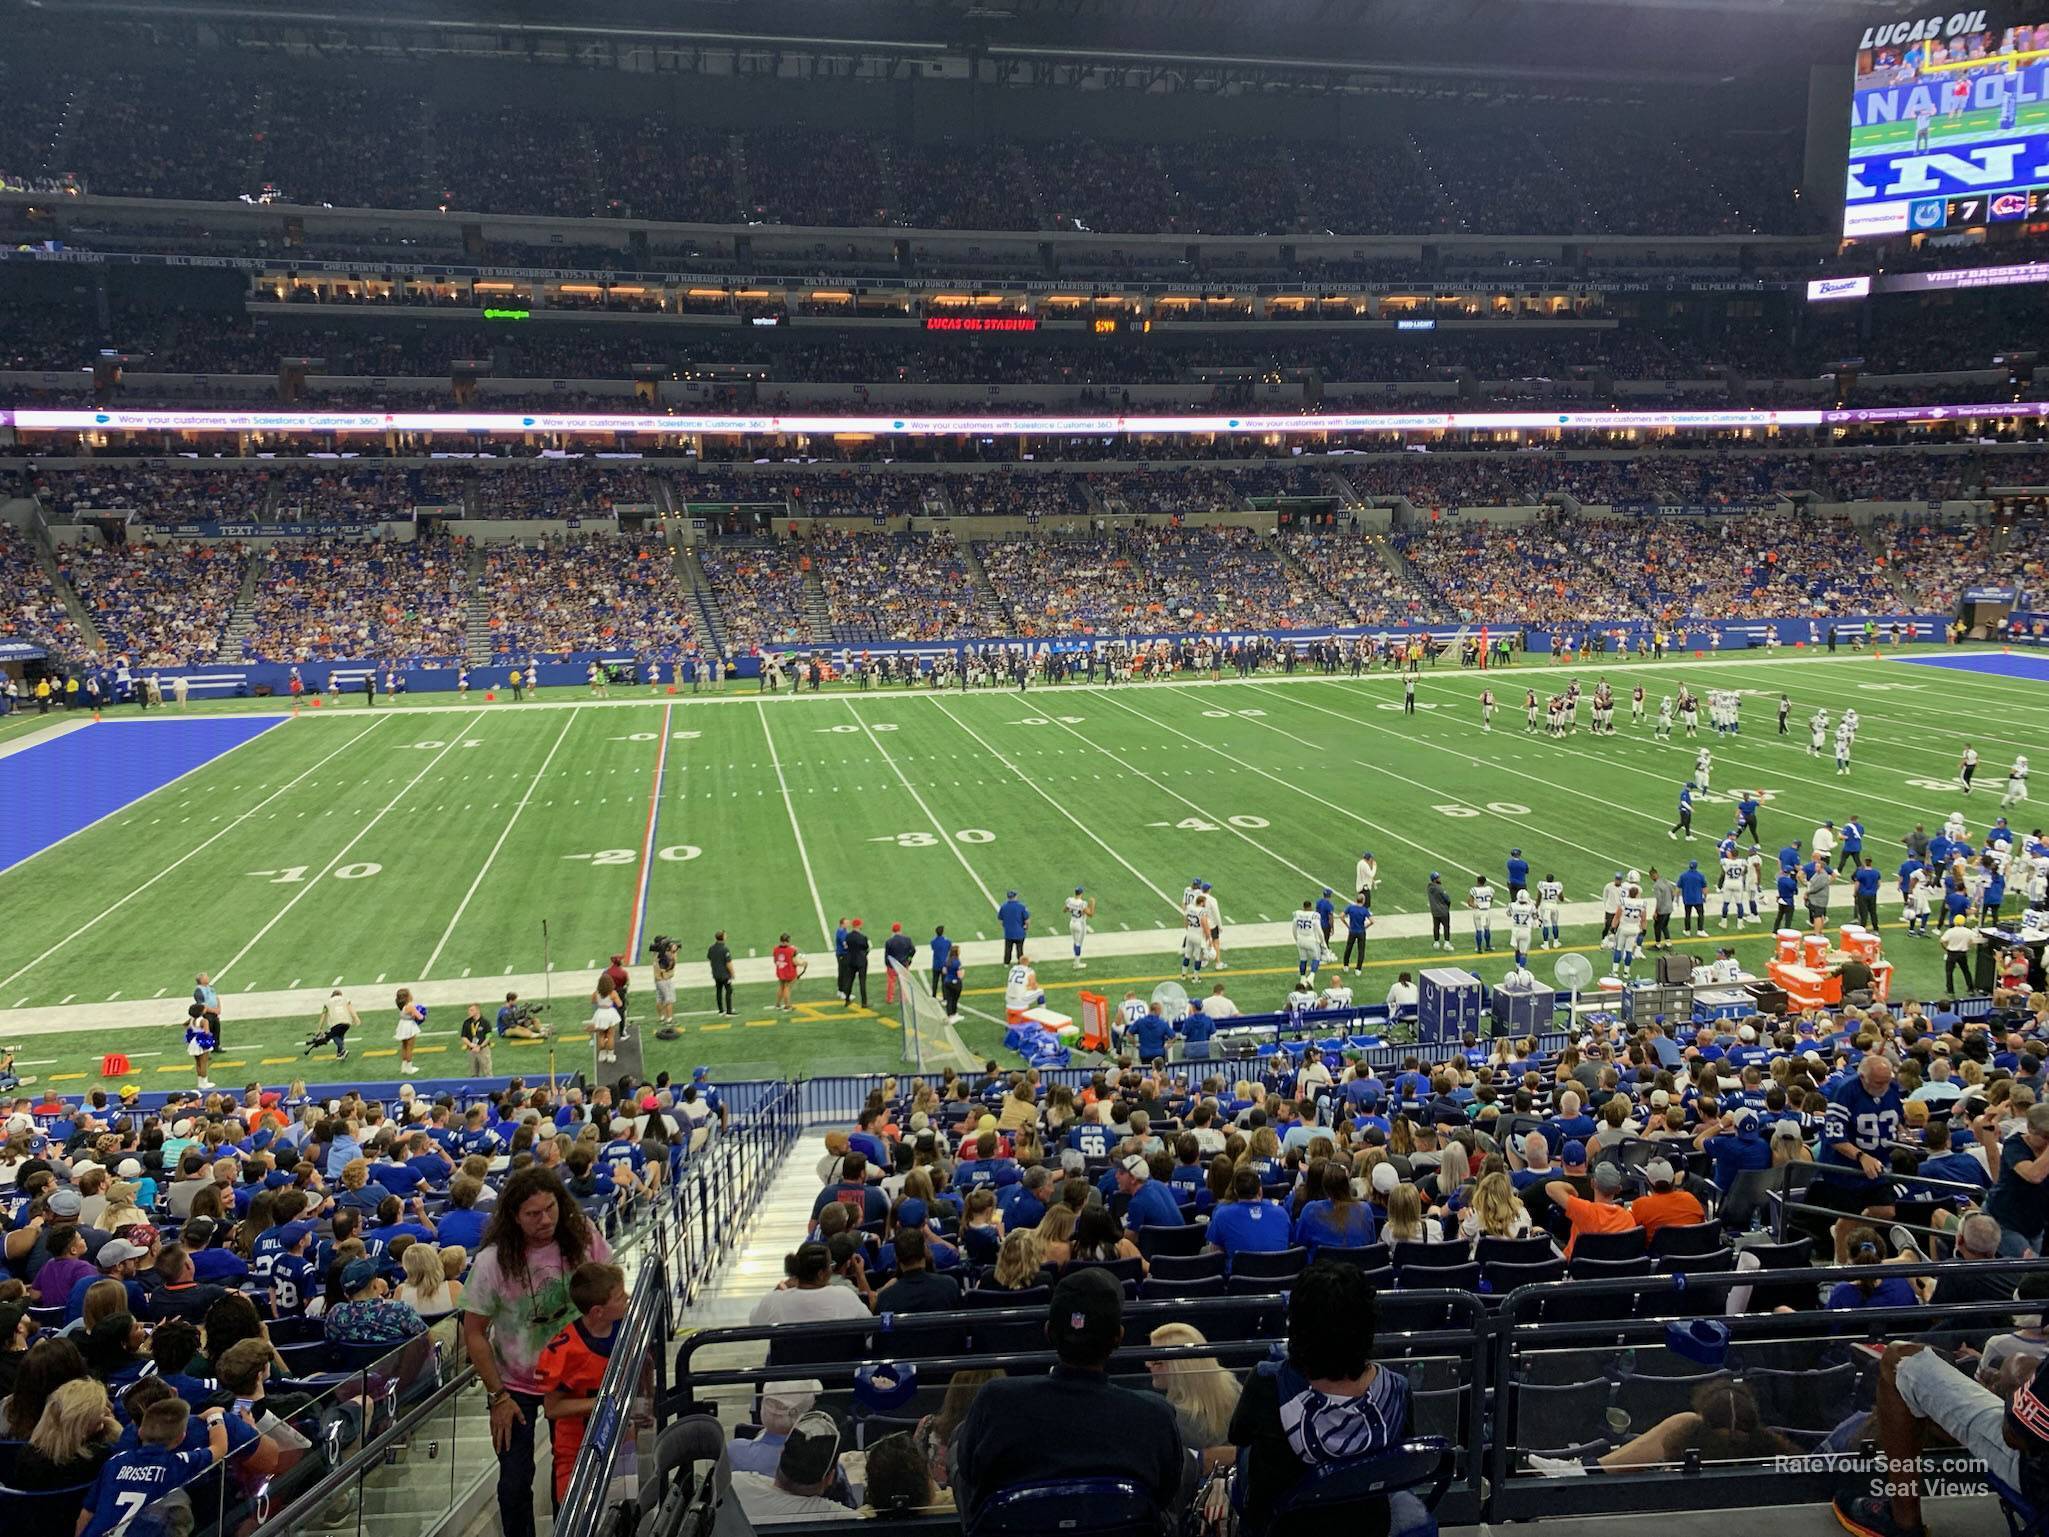 section 242, row 1 seat view  for football - lucas oil stadium